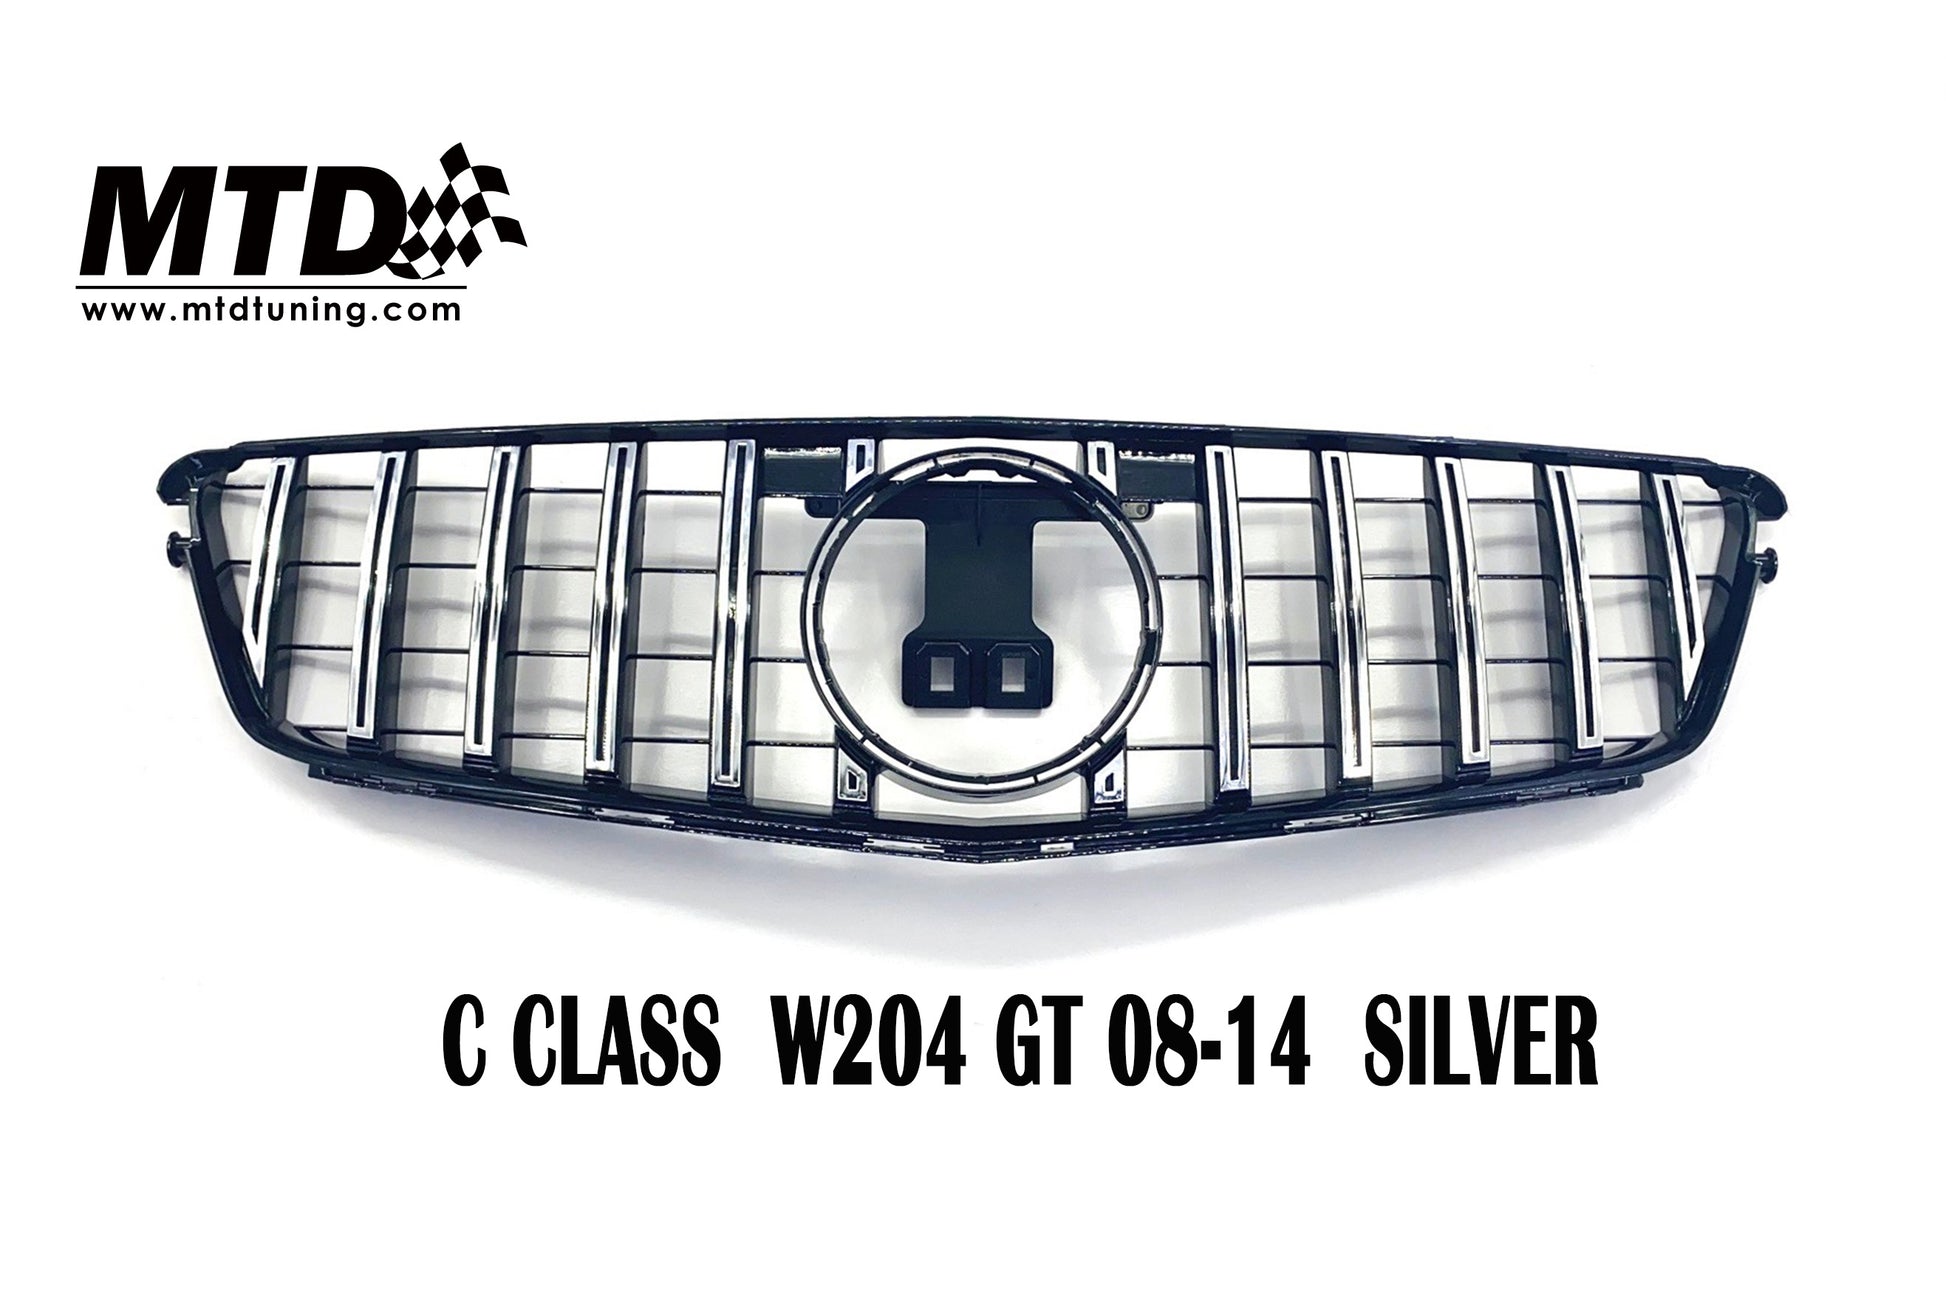 Mercedes-Benz C Class W204 Front Grille  GT 08-14 Silver